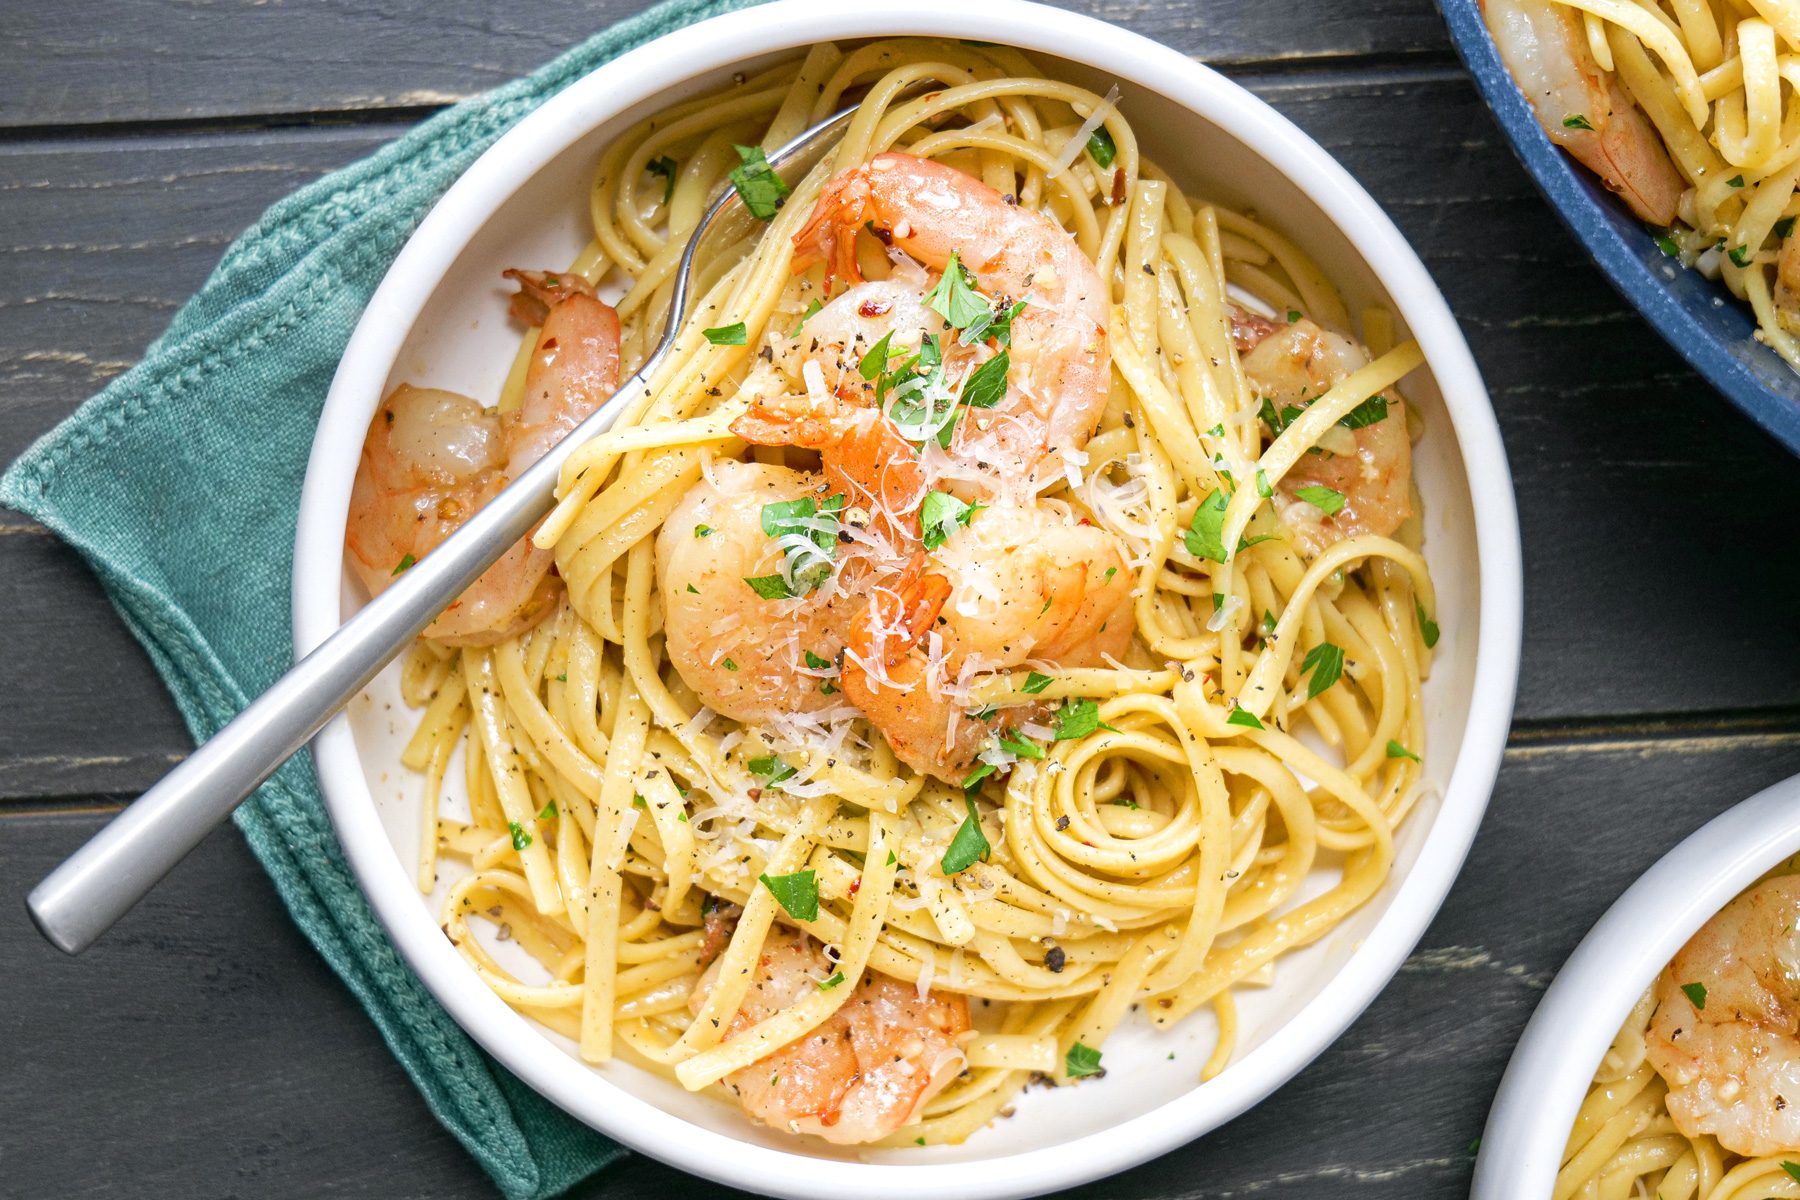 A bowl of pasta with shrimp and parmesan cheese